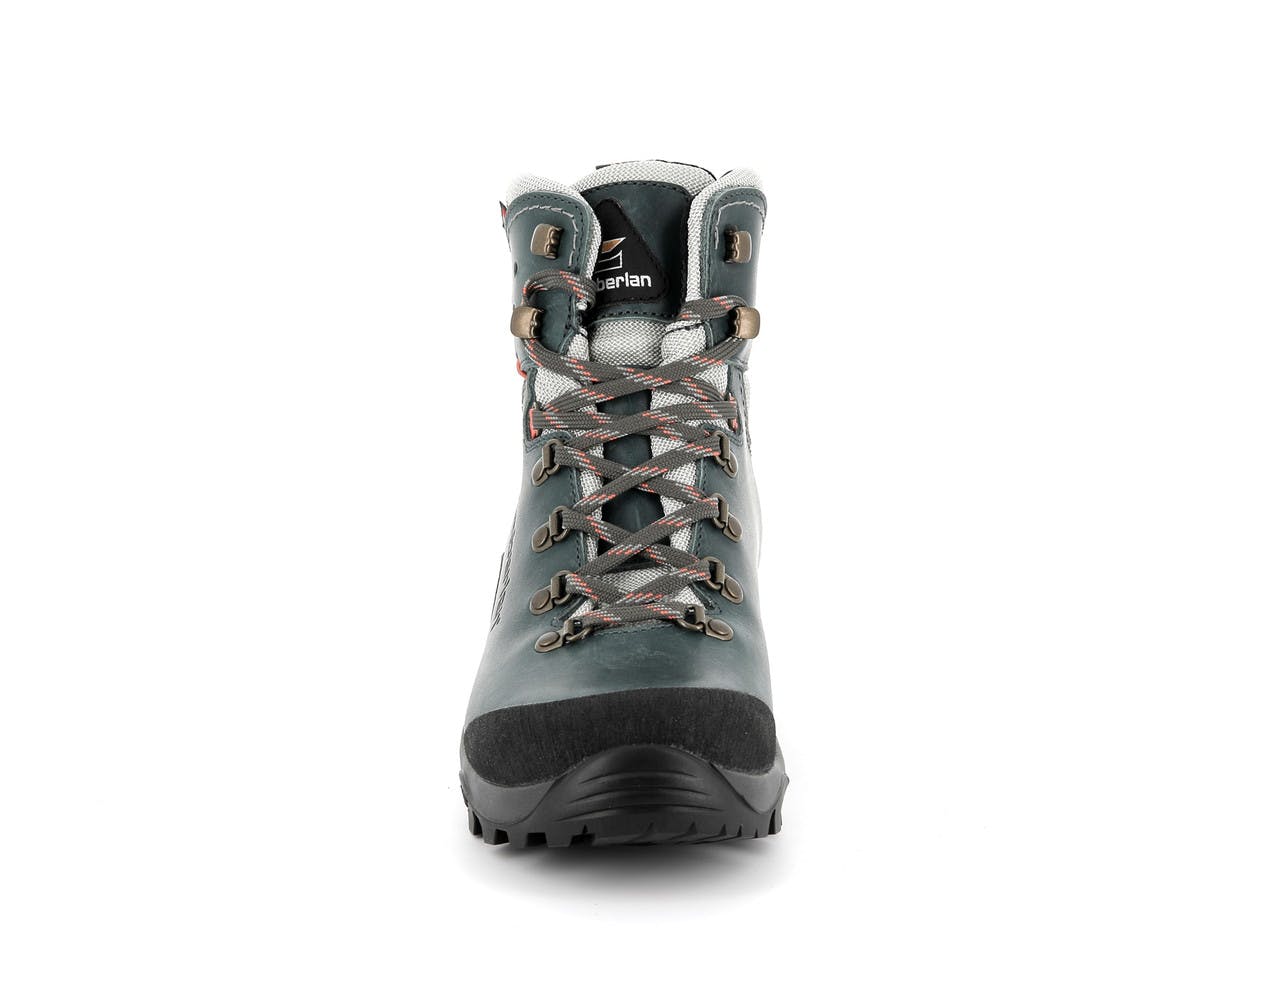 330 Marie Gore-Tex Backpacking Boots Peacock